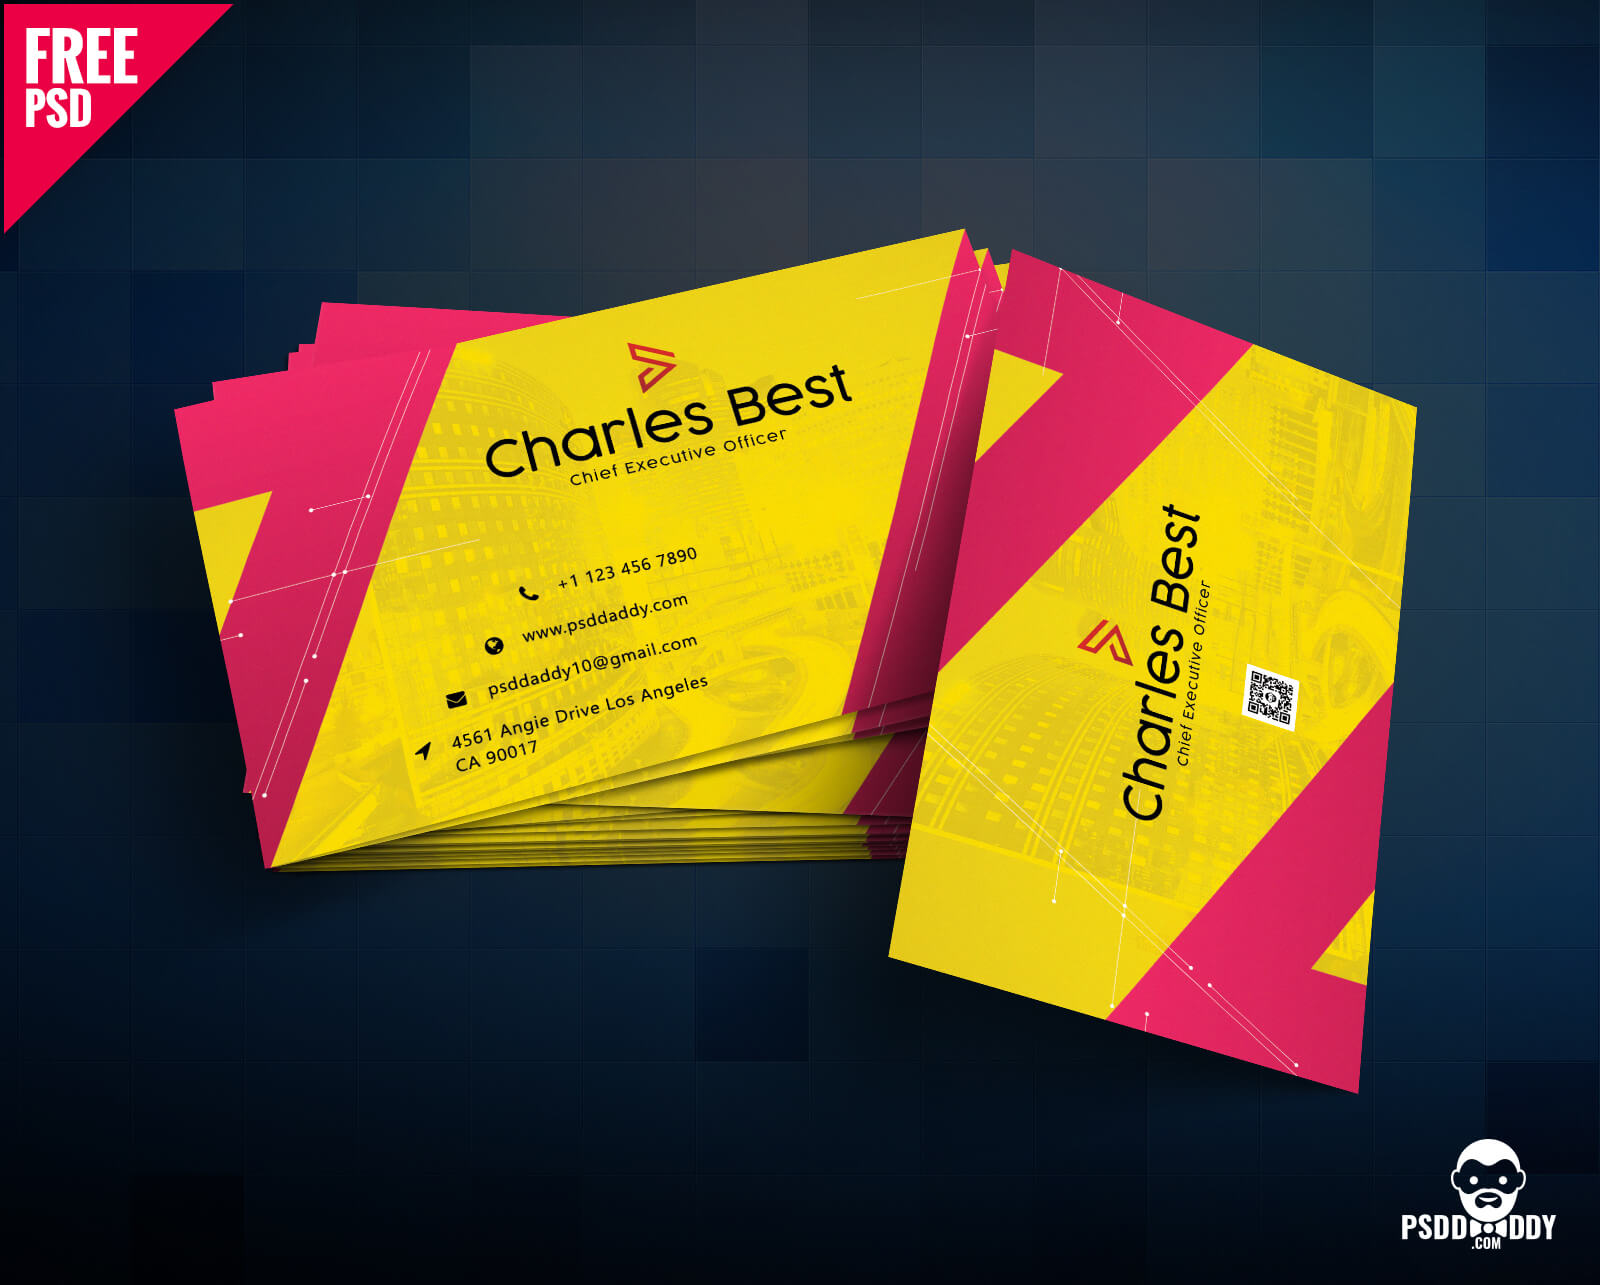 Download] Creative Business Card Free Psd | Psddaddy With Visiting Card Template Psd Free Download